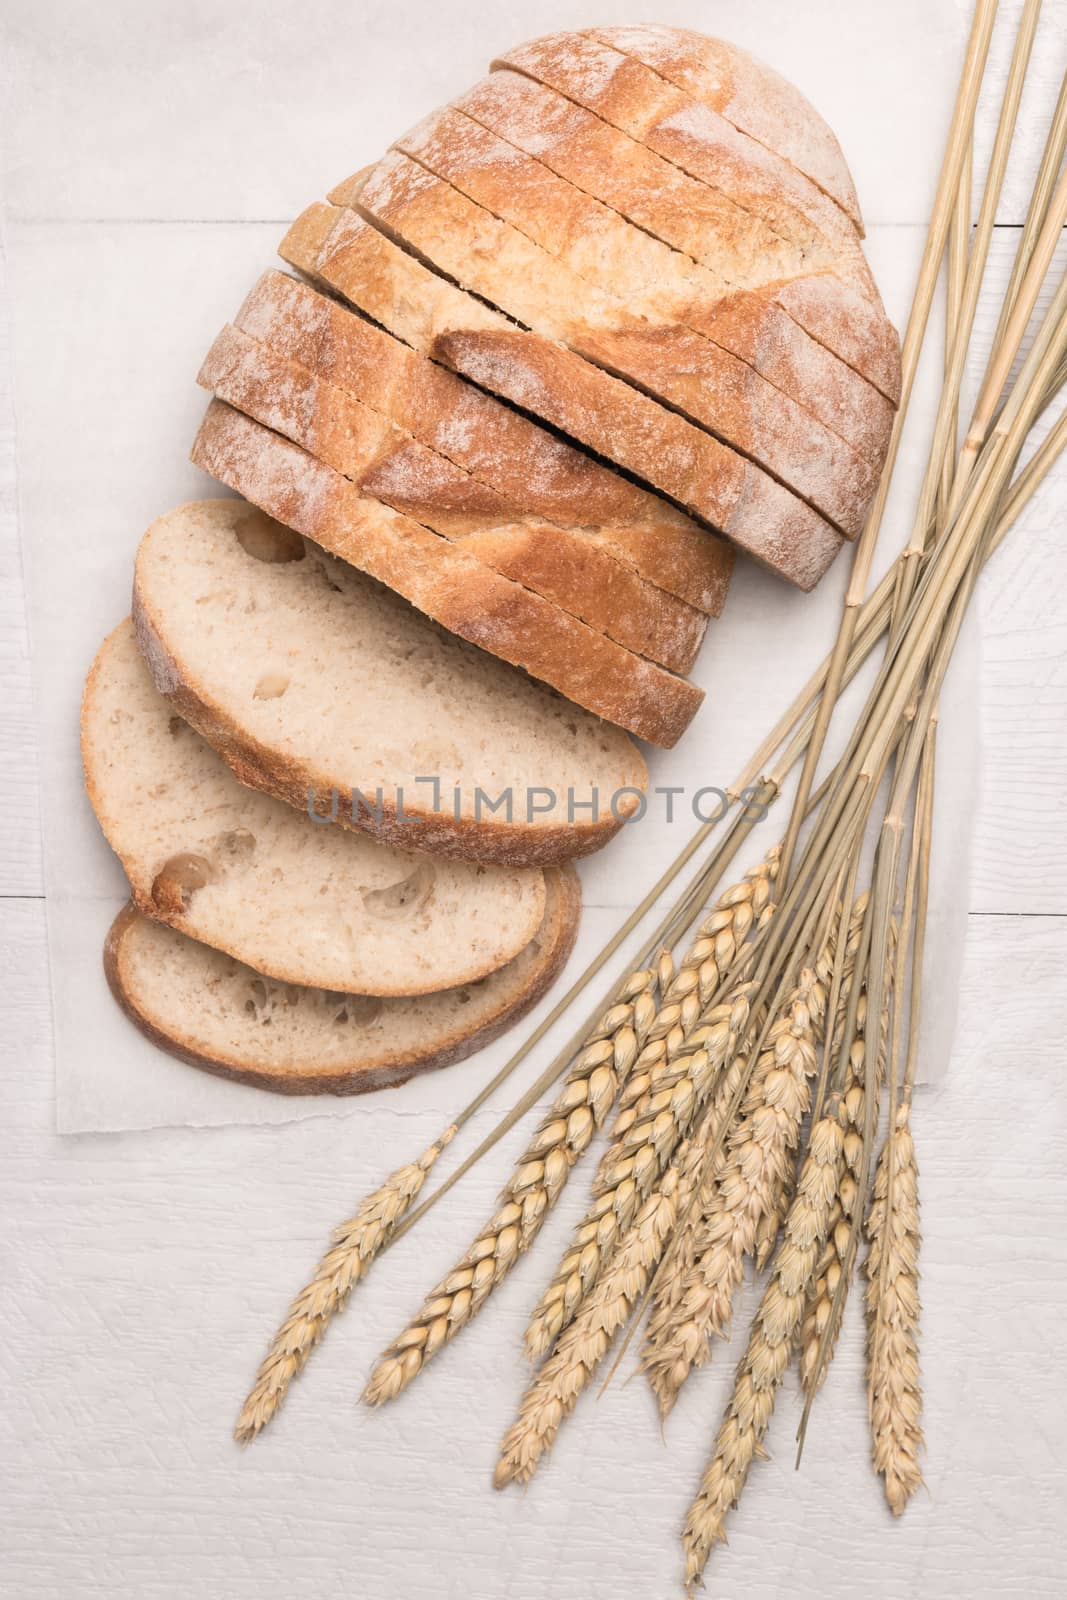 Fresh homemade bread and wheat spike on wooden background. Top view with copy space.